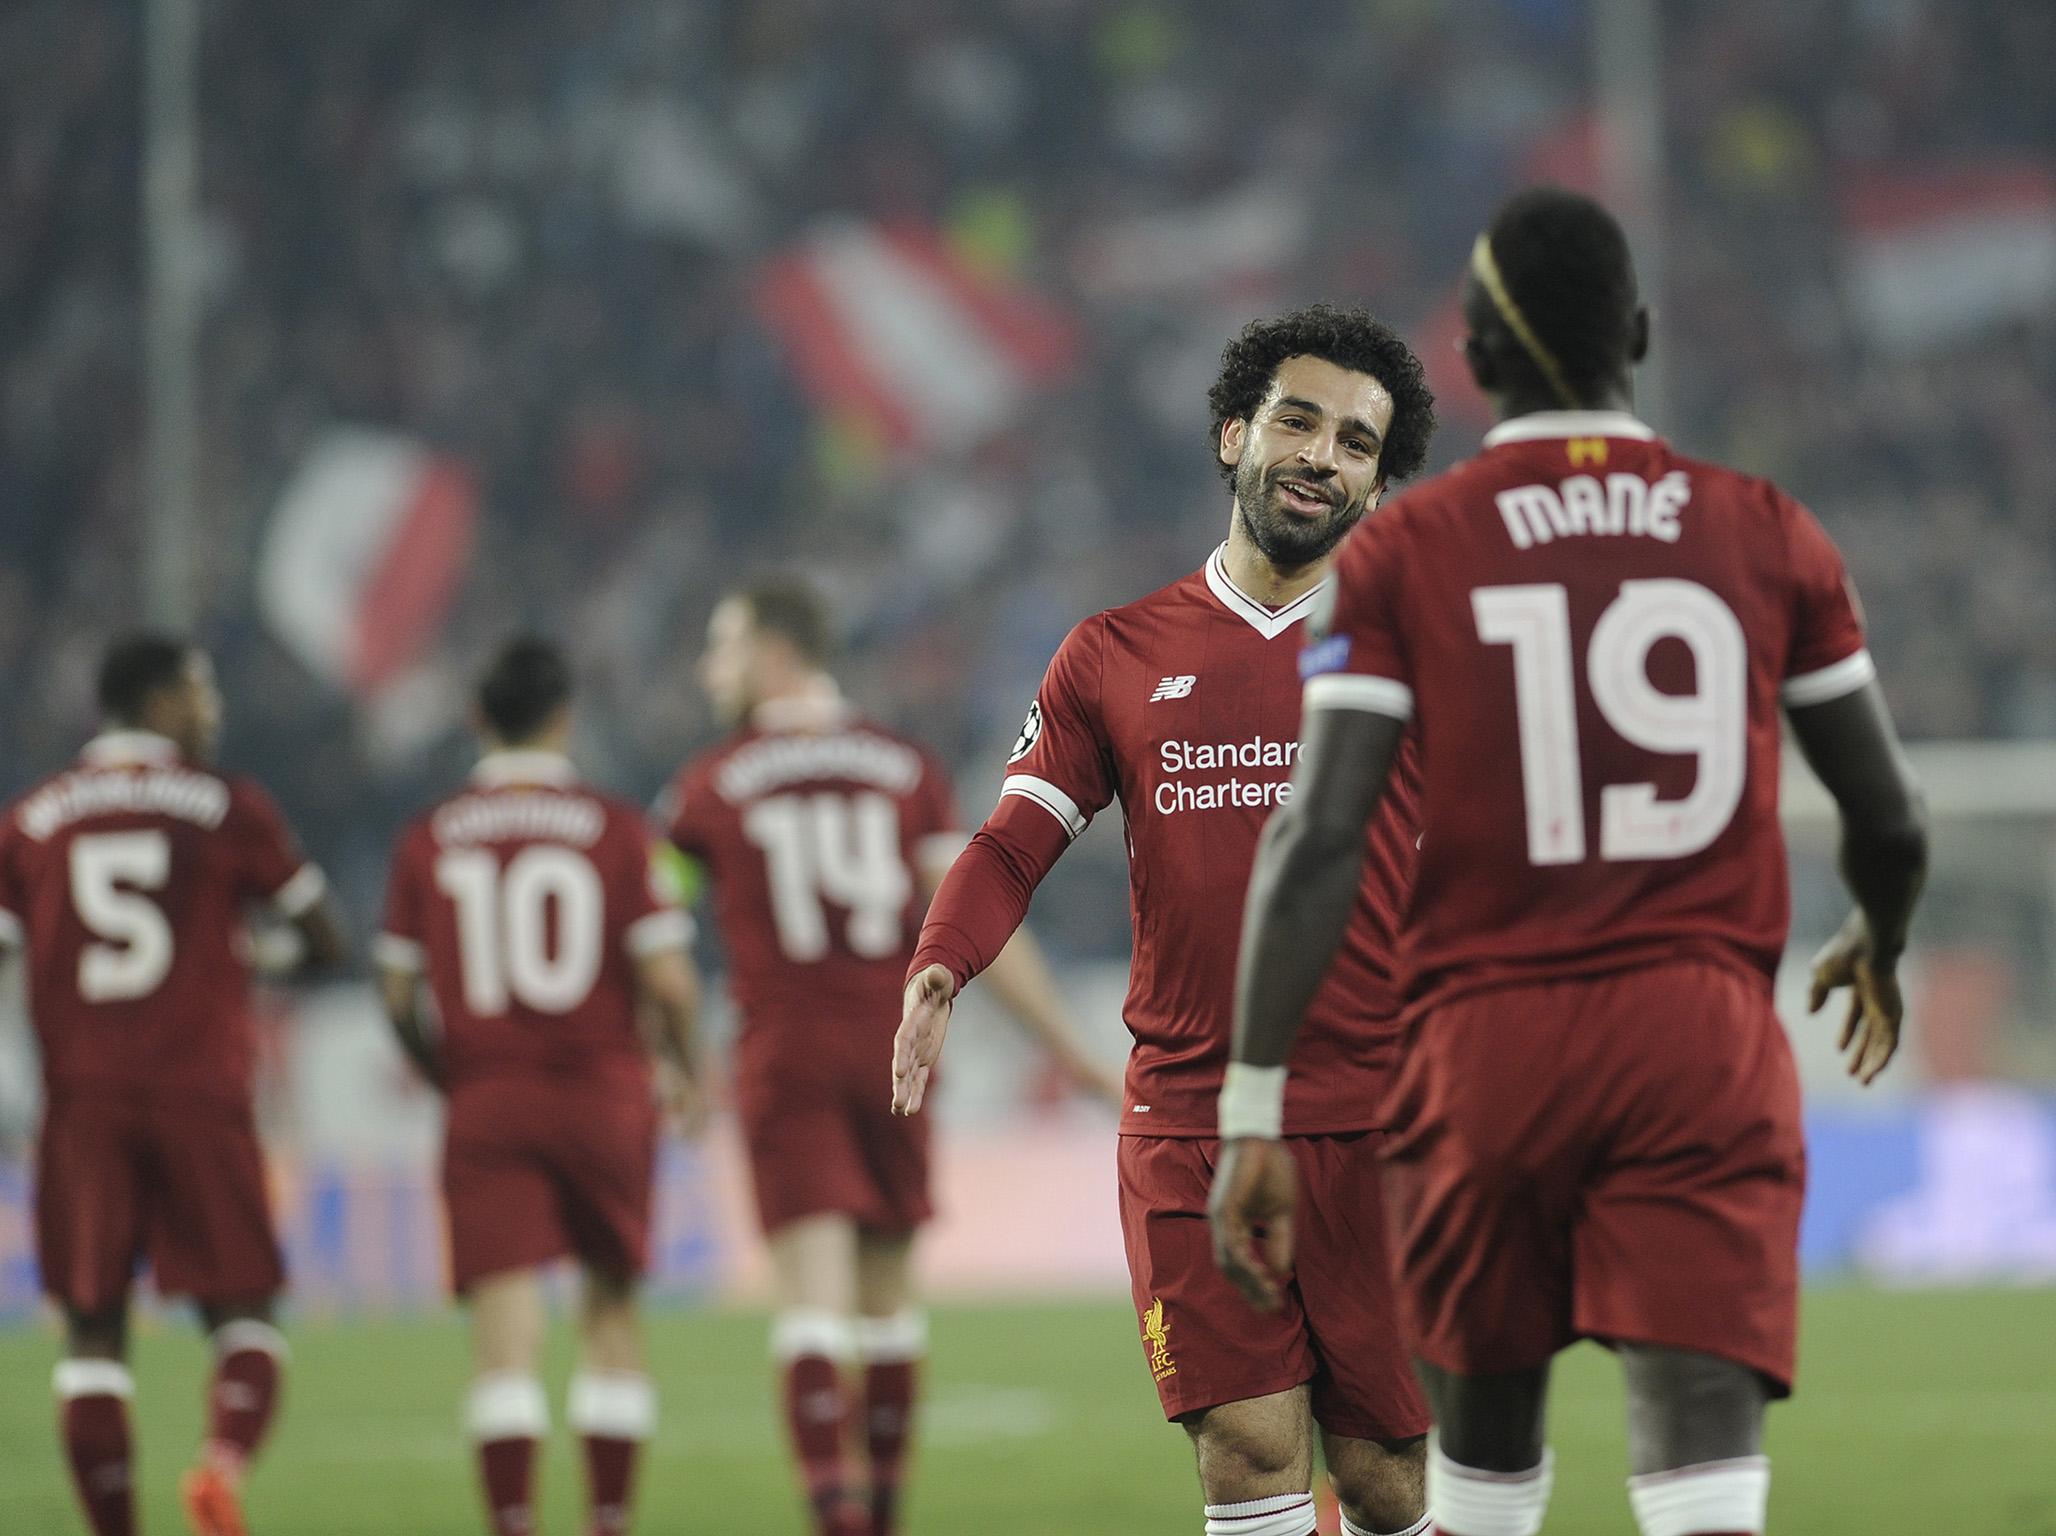 Klopp uses the pace and intelligence of Salah and Mane expertly